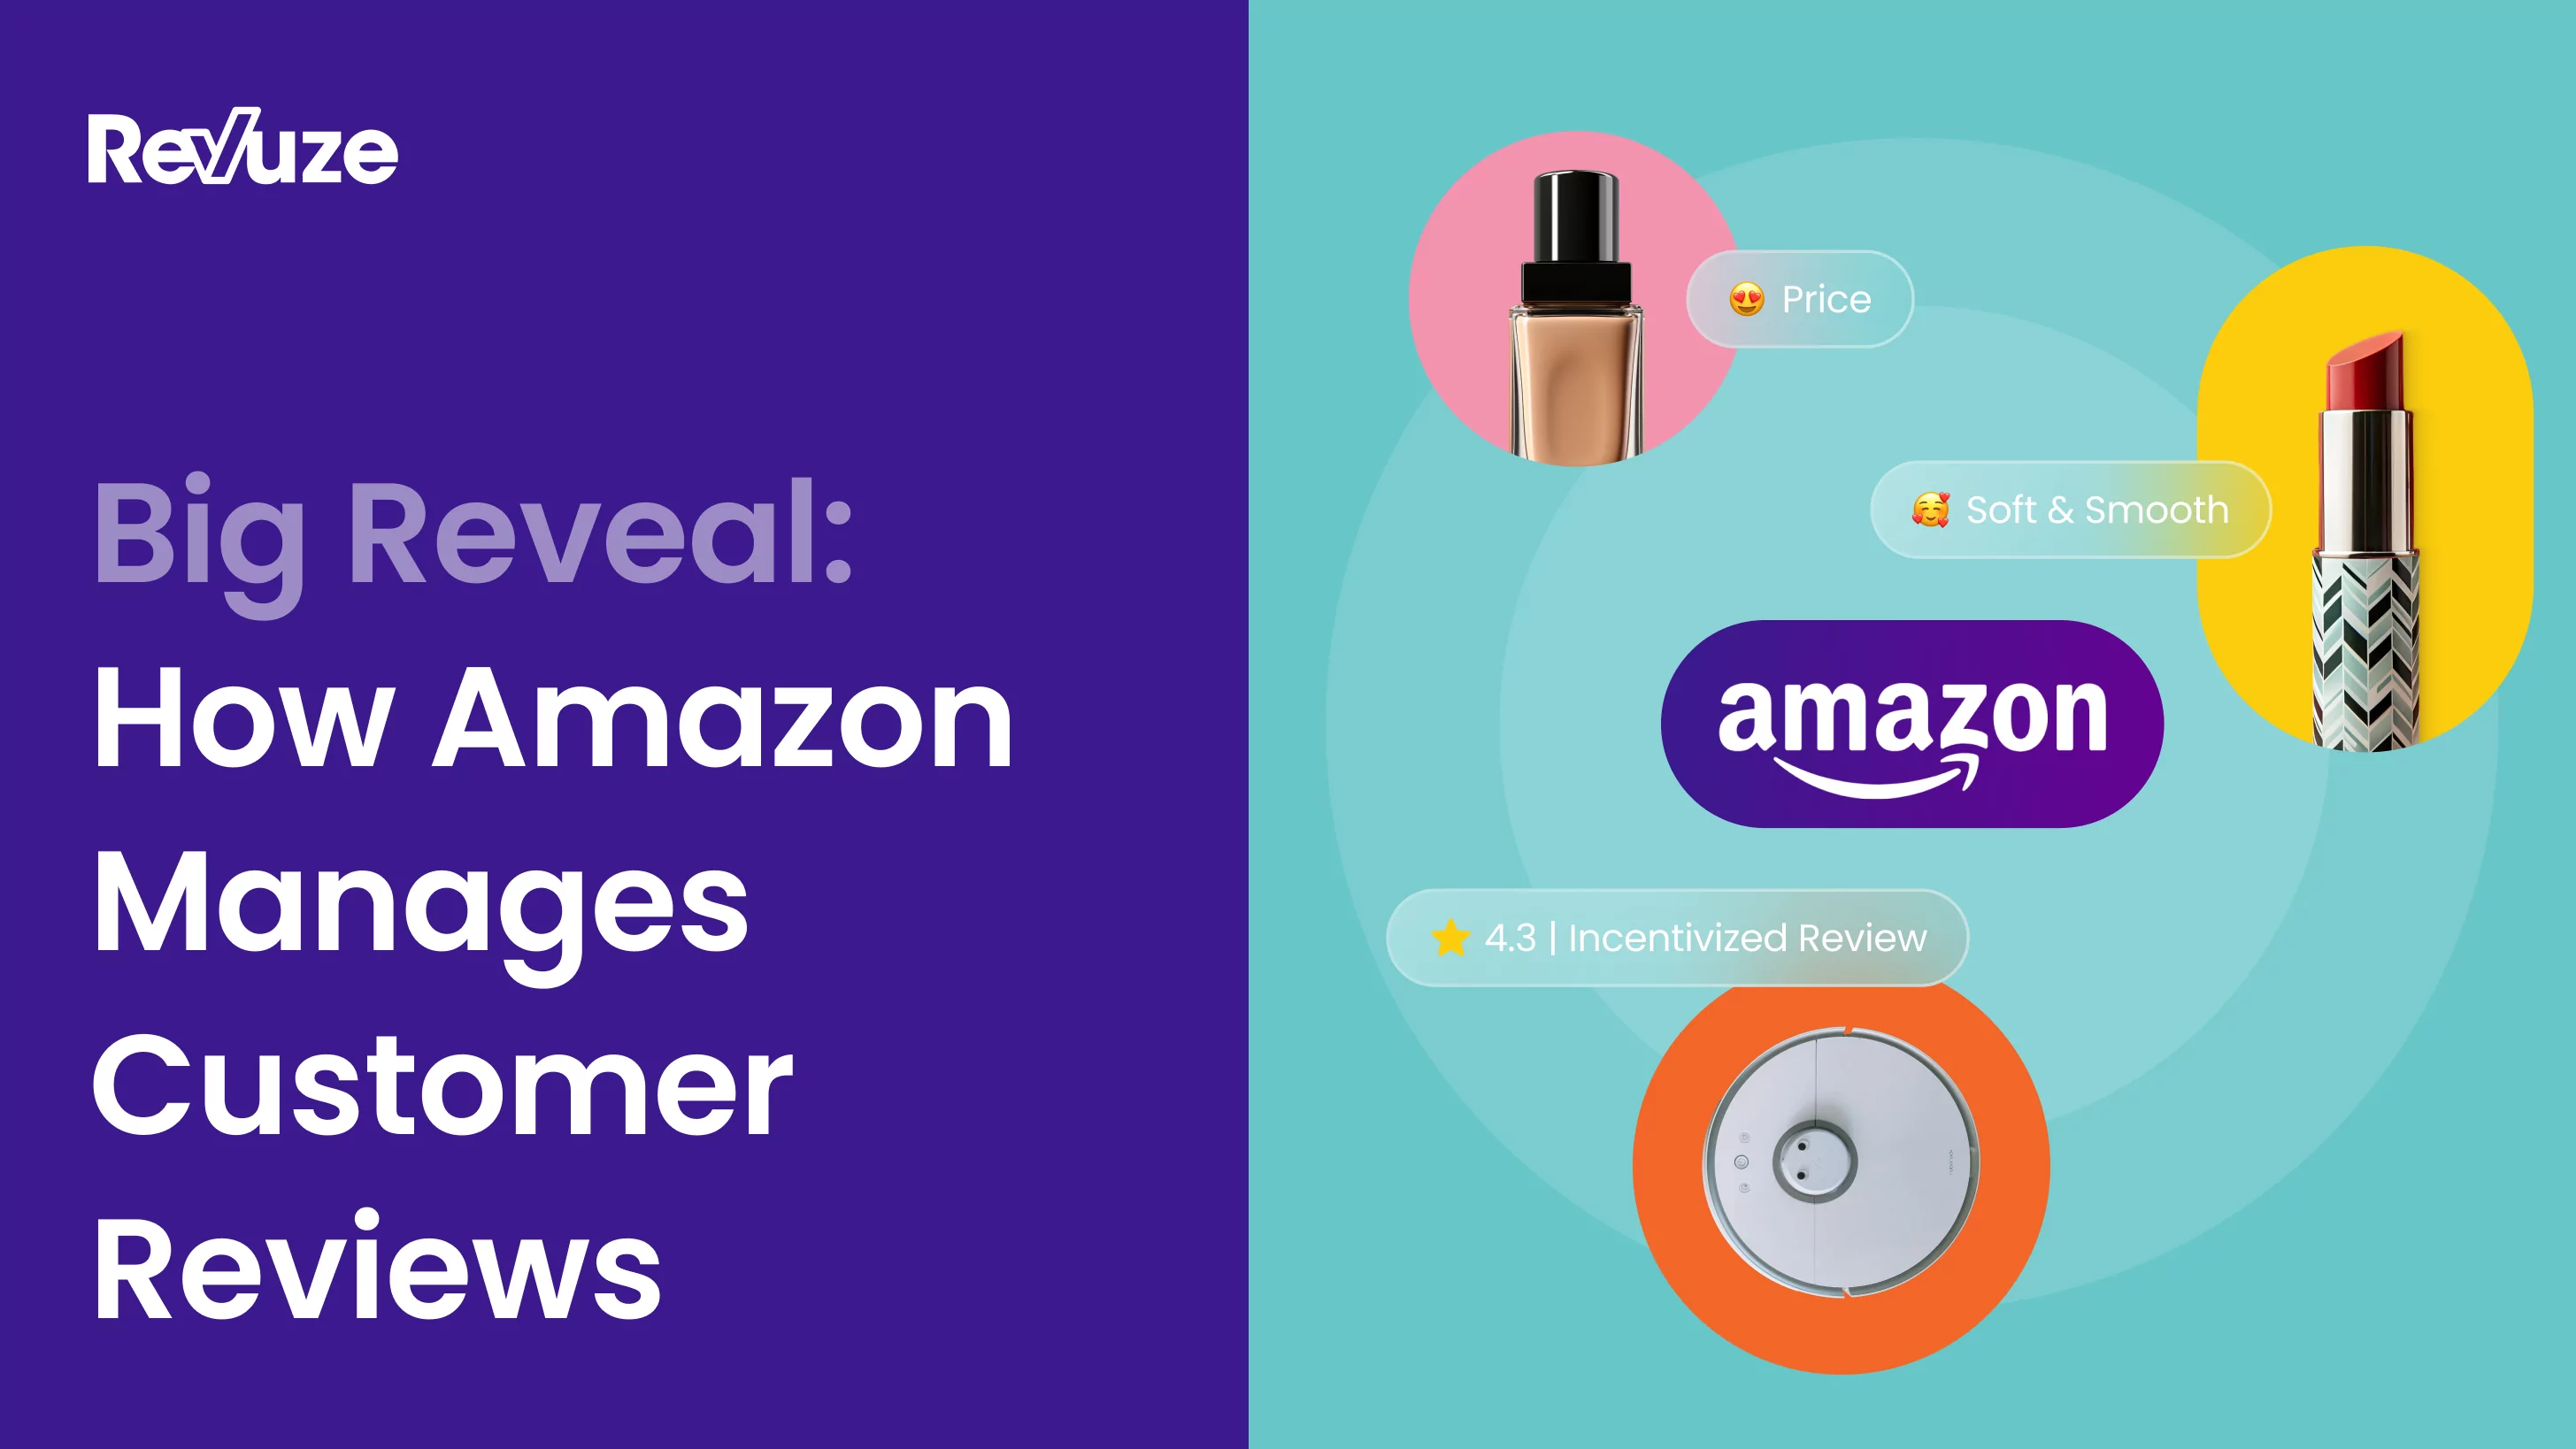 Big Reveal: How Amazon Manages Customer Reviews